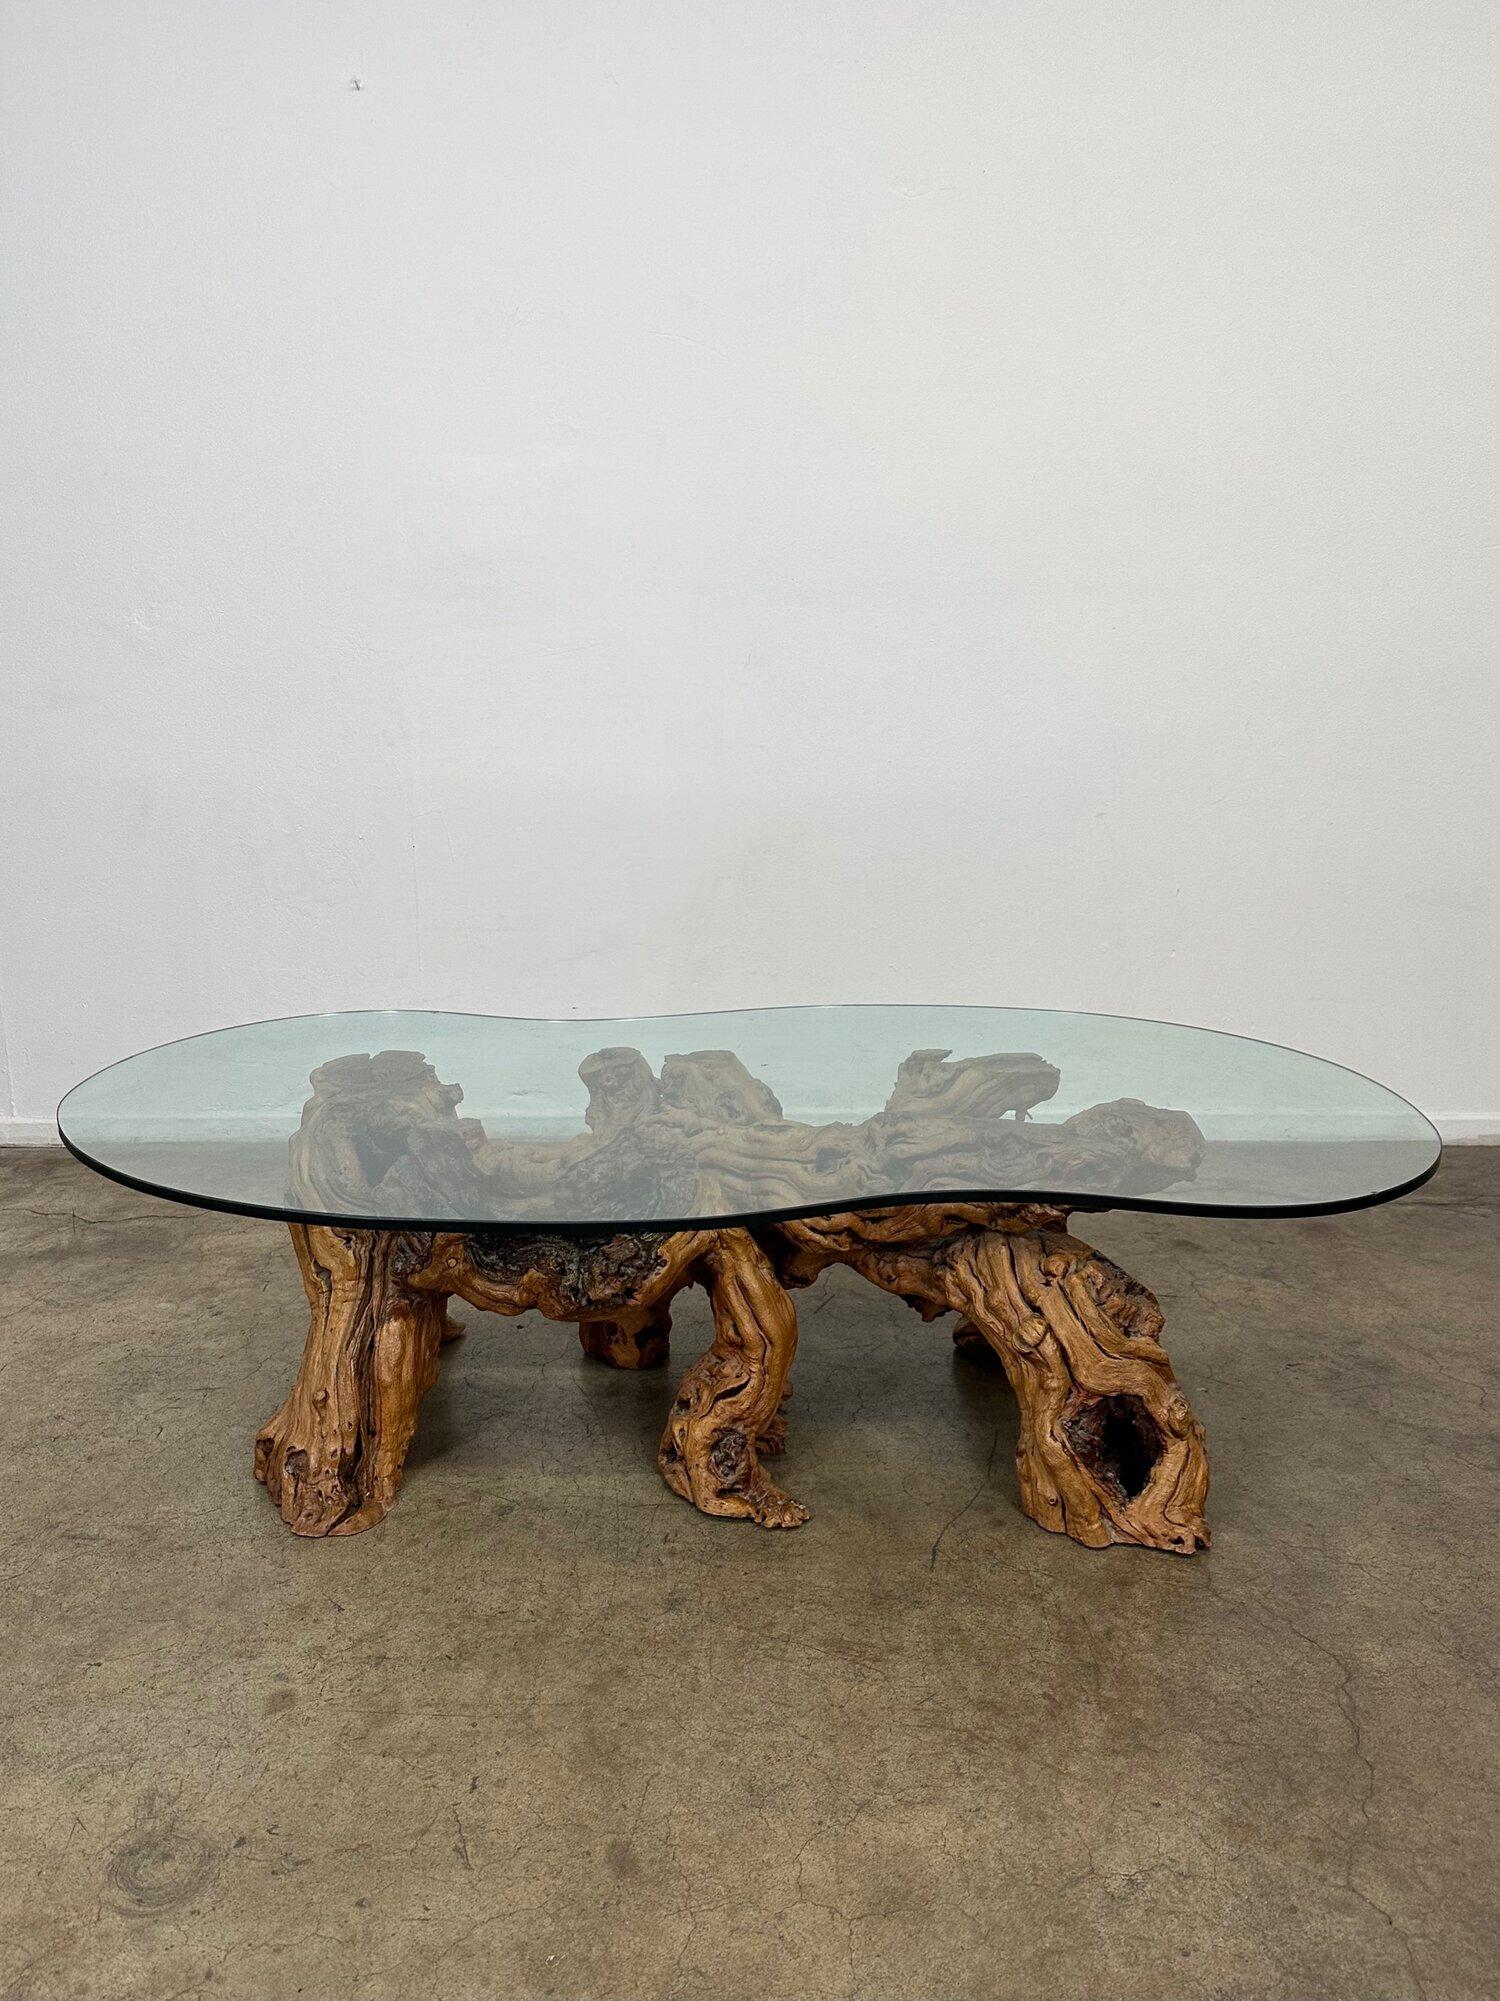 Designed in the 1960s in the United States this coffee table features a burled base, driftwood, and glass. This item is in overall good vintage state. Please refer to images for further detail on wear and condition. 



